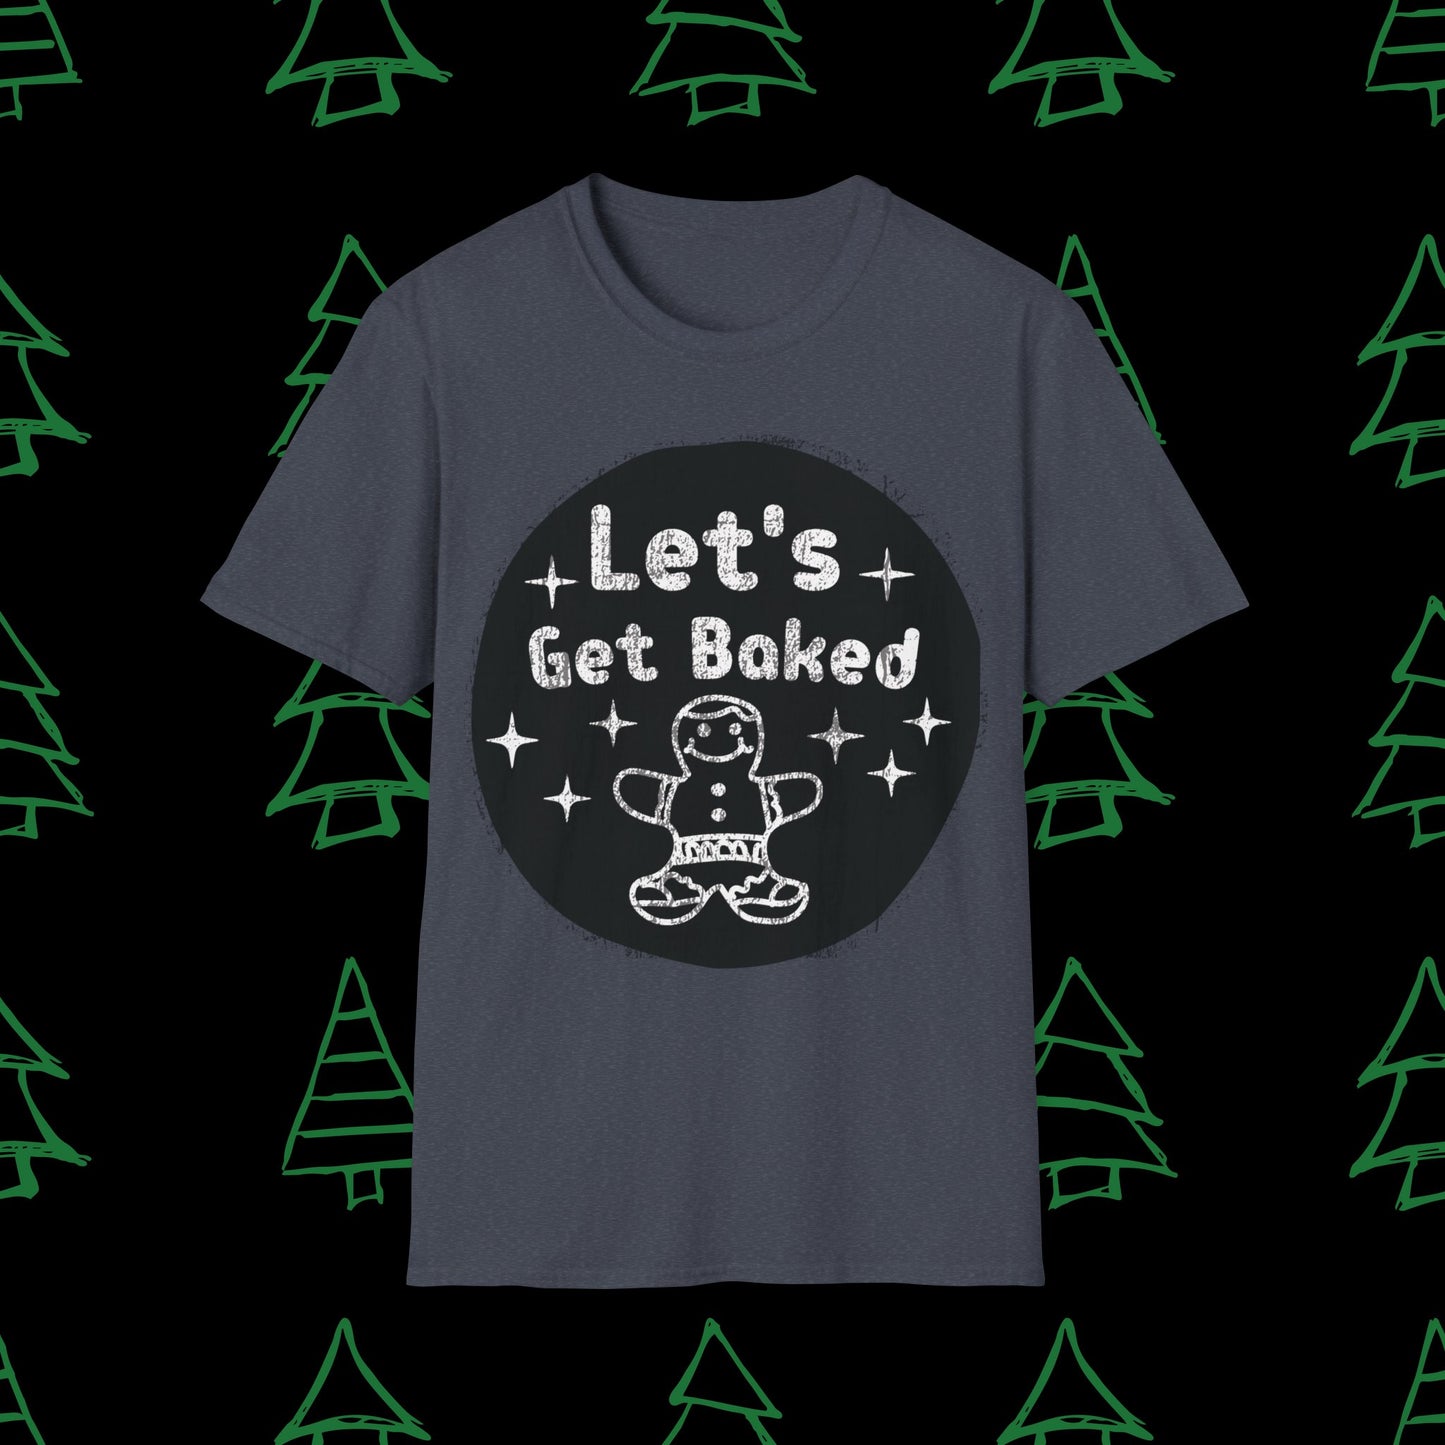 Christmas T-Shirt - Let's Get Baked - Mens Christmas Shirts - Adult Christmas TShirts T-Shirts Graphic Avenue Heather Navy Adult Small 